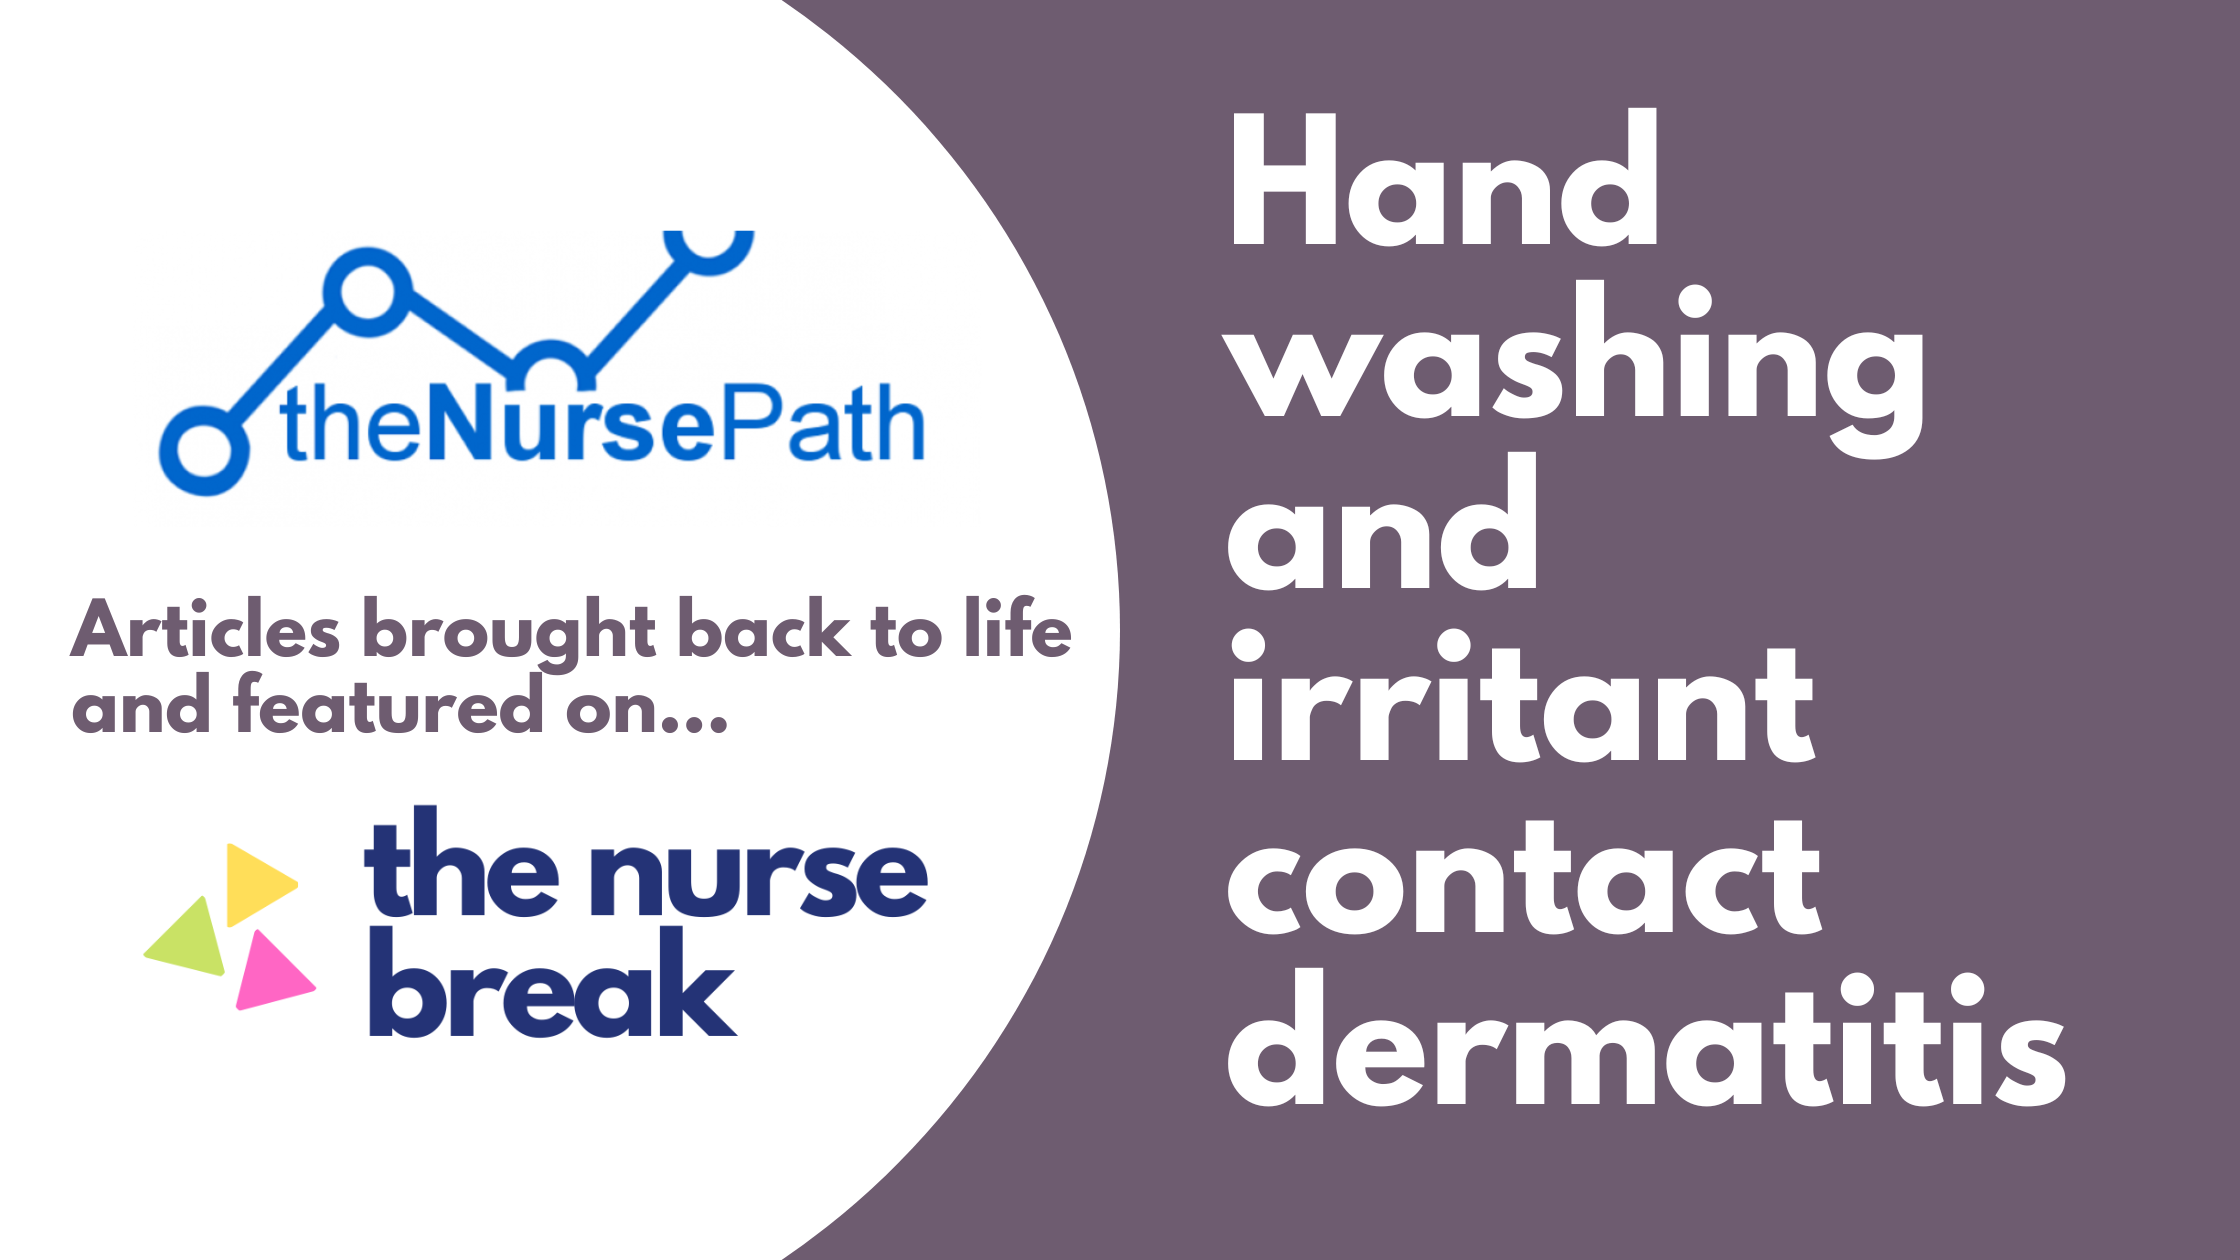 Hand washing and irritant contact dermatitis